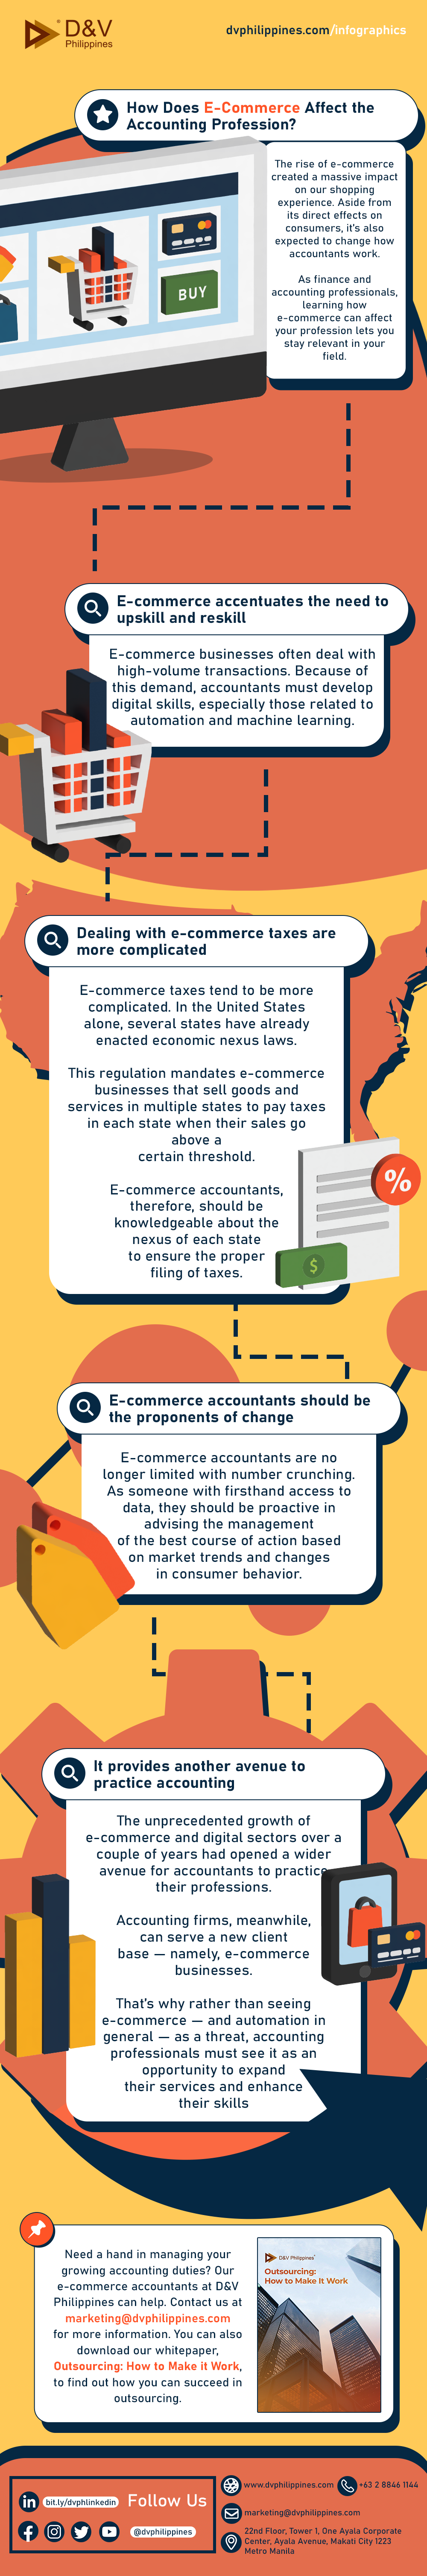 DV_How-Does-E-Commerce-Affect-the-Accounting-Profession_WEBSITE-VERSION